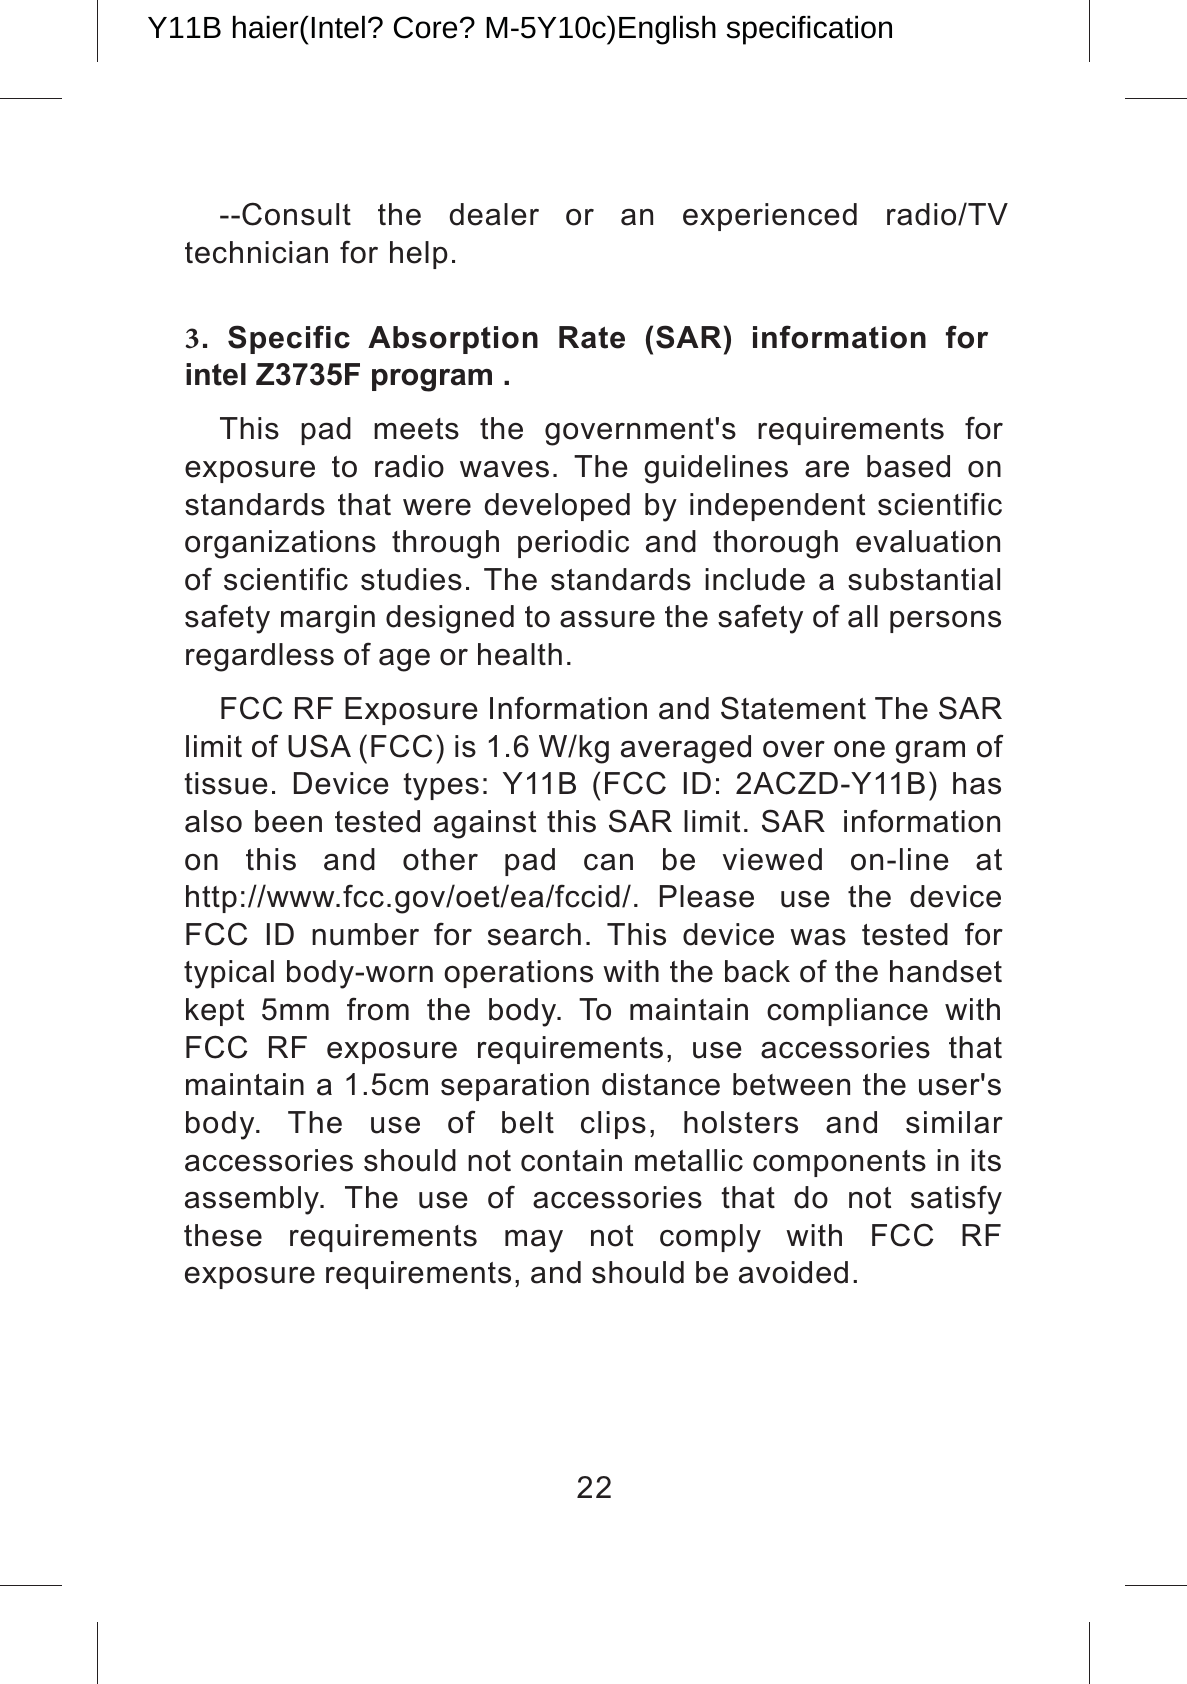 --Consult  the  dealer  or  an  experienced  radio/TV  technician for help. 3.  Specific  Absorption  Rate  (SAR)  information  for intel Z3735F program .This  pad  meets  the  government&apos;s  requirements  for exposure  to  radio  waves.  The  guidelines  are  based  on standards that were developed by independent scientific organizations  through  periodic  and  thorough  evaluation of scientific studies. The standards include a substantial safety margin designed to assure the safety of all persons regardless of age or health.FCC RF Exposure Information and Statement The SAR limit of USA (FCC) is 1.6 W/kg averaged over one gram of tissue.  Device  types:  Y11B  (FCC  ID:  2ACZD-Y11B)  has also been tested against this SAR limit. SAR information on  this  and  other  pad  can  be  viewed  on-line  at http://www.fcc.gov/oet/ea/fccid/.  Please use  the  device FCC  ID  number  for  search.  This  device  was  tested  for typical body-worn operations with the back of the handset kept  5mm  from  the  body.  To  maintain  compliance  with FCC  RF  exposure  requirements,  use  accessories  that maintain a 1.5cm separation distance between the user&apos;s body.  The  use  of  belt  clips,  holsters  and  similar accessories should not contain metallic components in its assembly.  The  use  of  accessories  that  do  not  satisfy these  requirements  may  not  comply  with  FCC  RF exposure requirements, and should be avoided.22Y11B haier(Intel? Core? M-5Y10c)English specification 